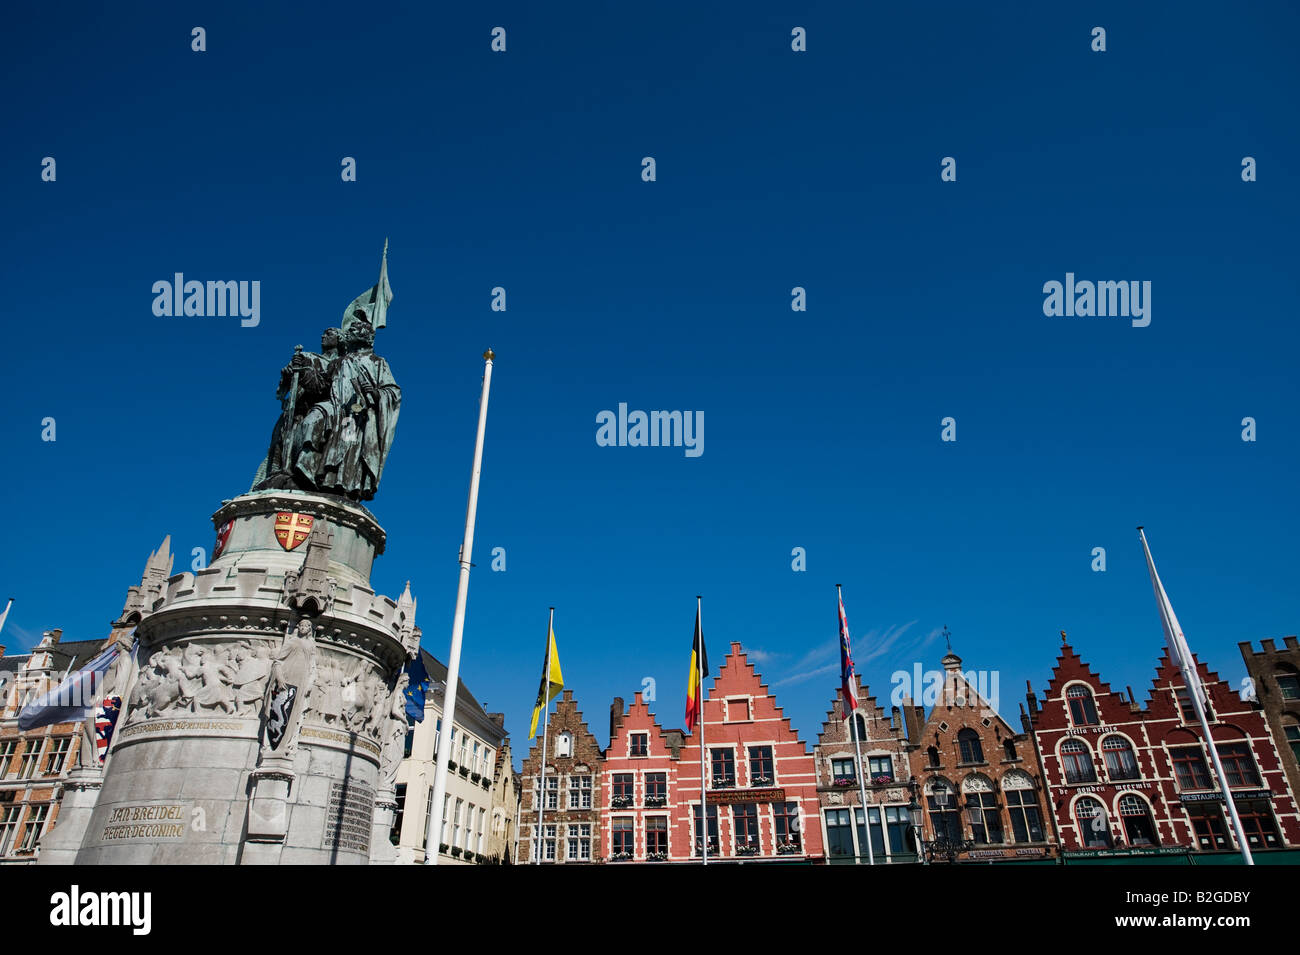 The market square in Bruges with a statue of Jan Breydel and Pieter de Coninck Stock Photo